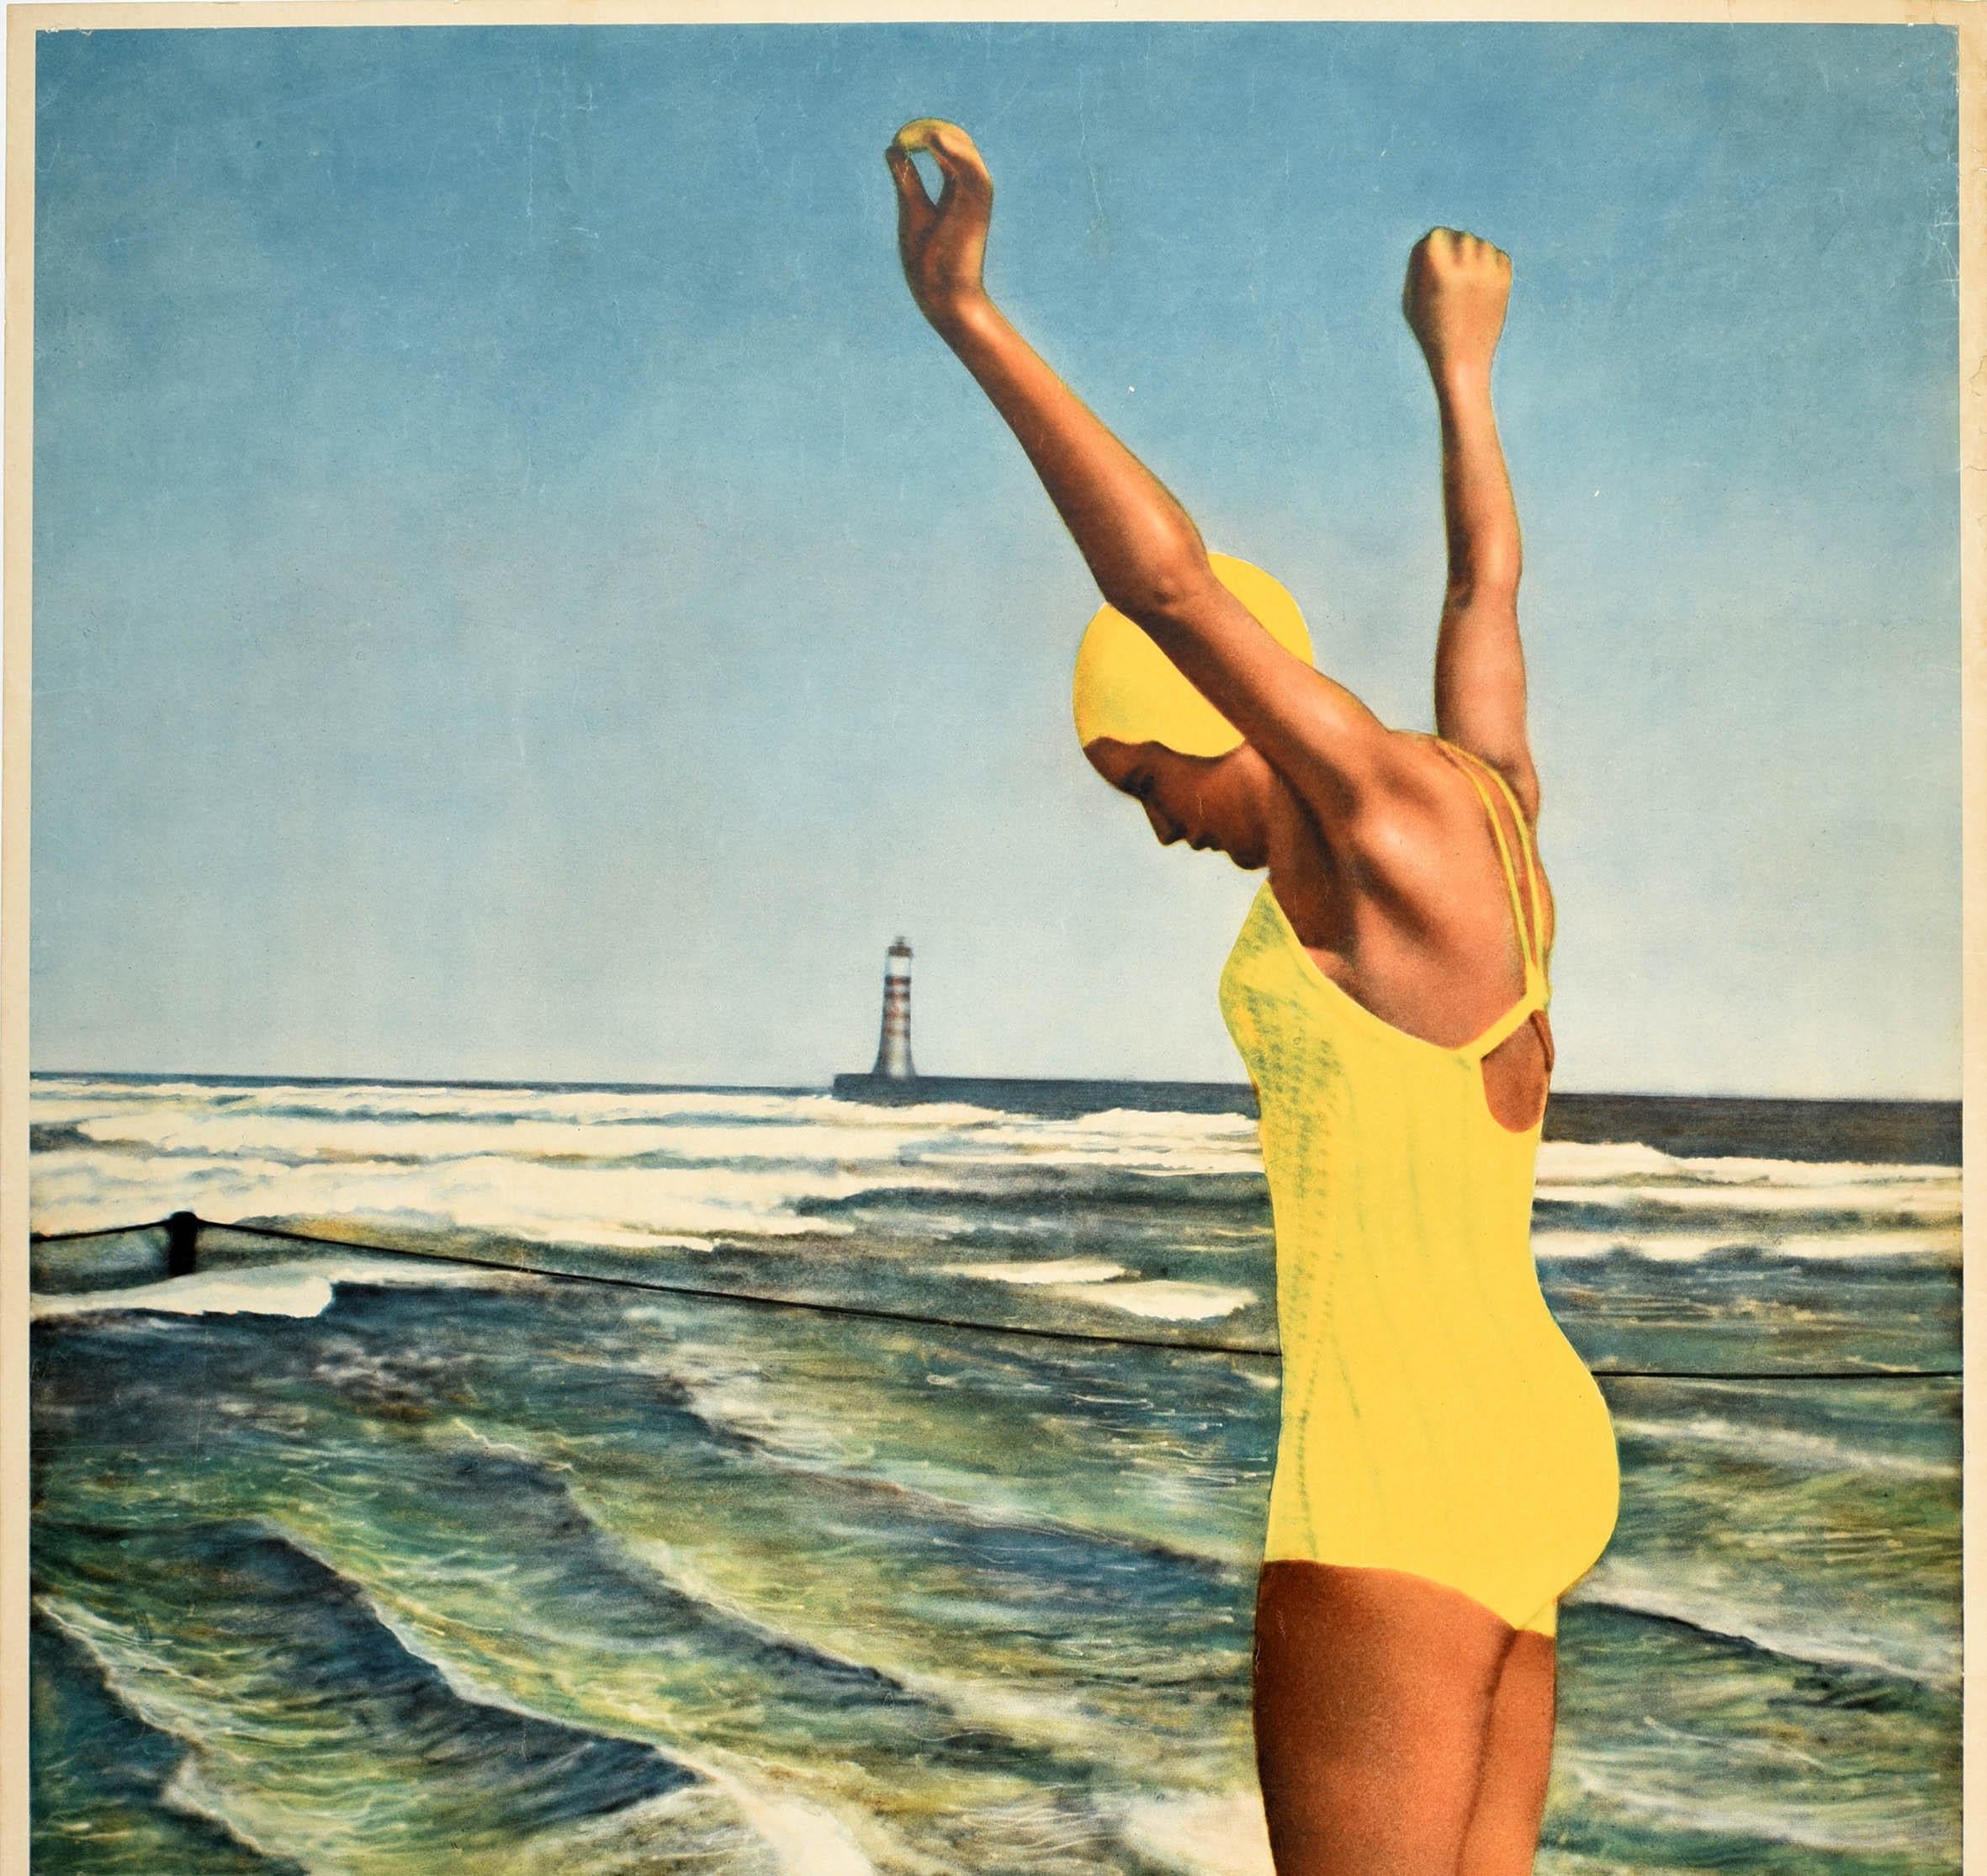 Original Vintage Travel Poster Sunny Holiday On The German Coast Sea Design Art In Good Condition For Sale In London, GB